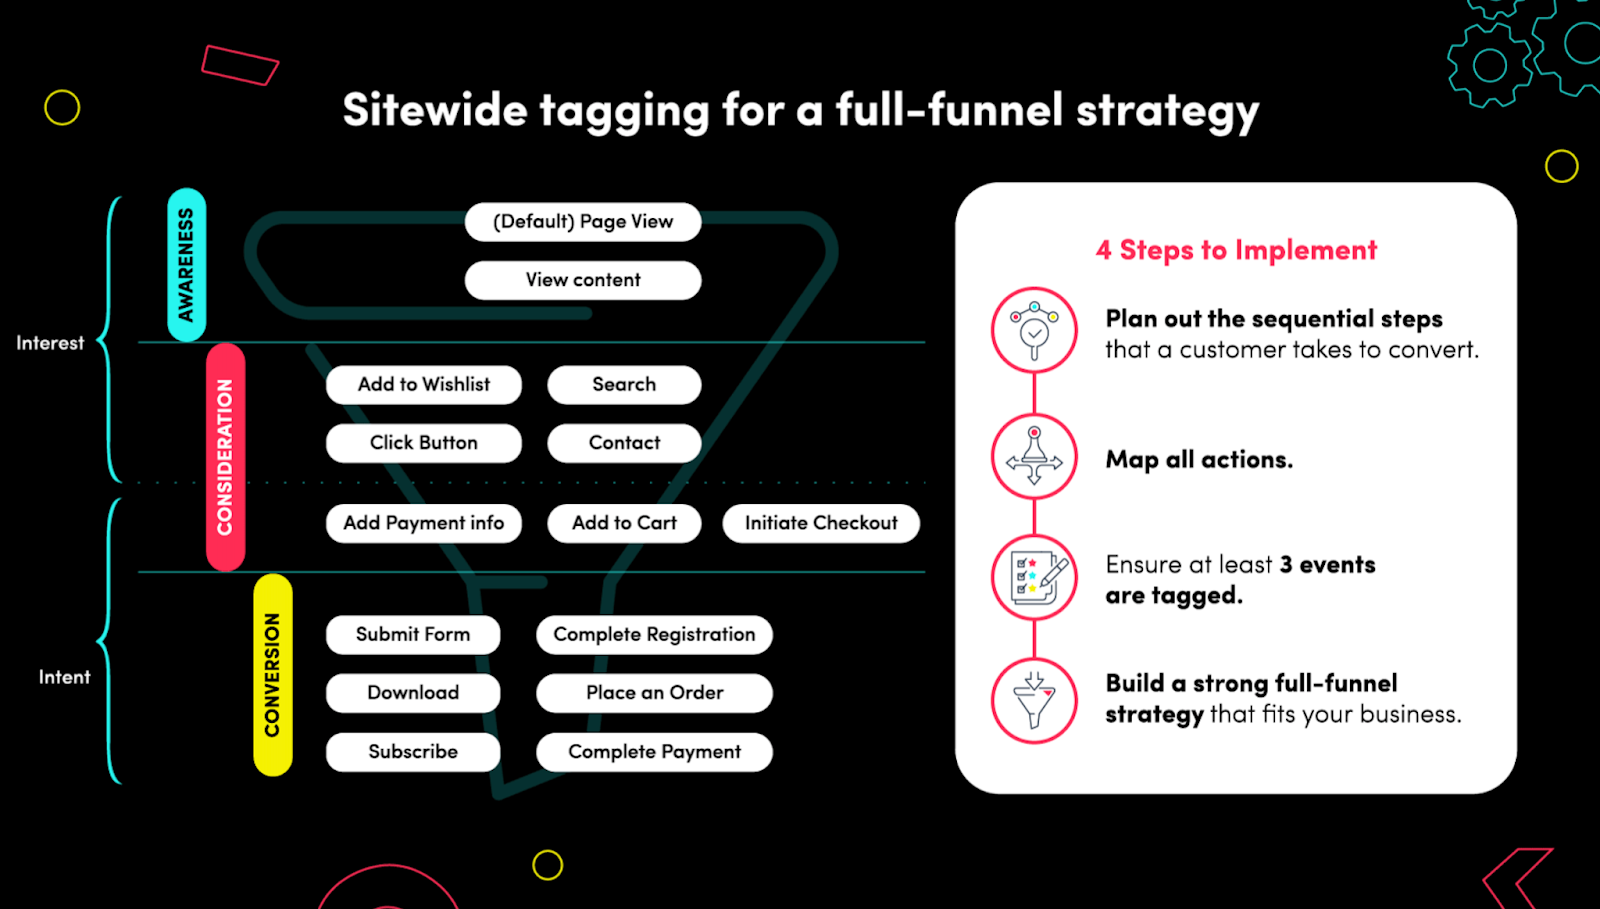 Overview of TikTok full-funnel campaign strategy